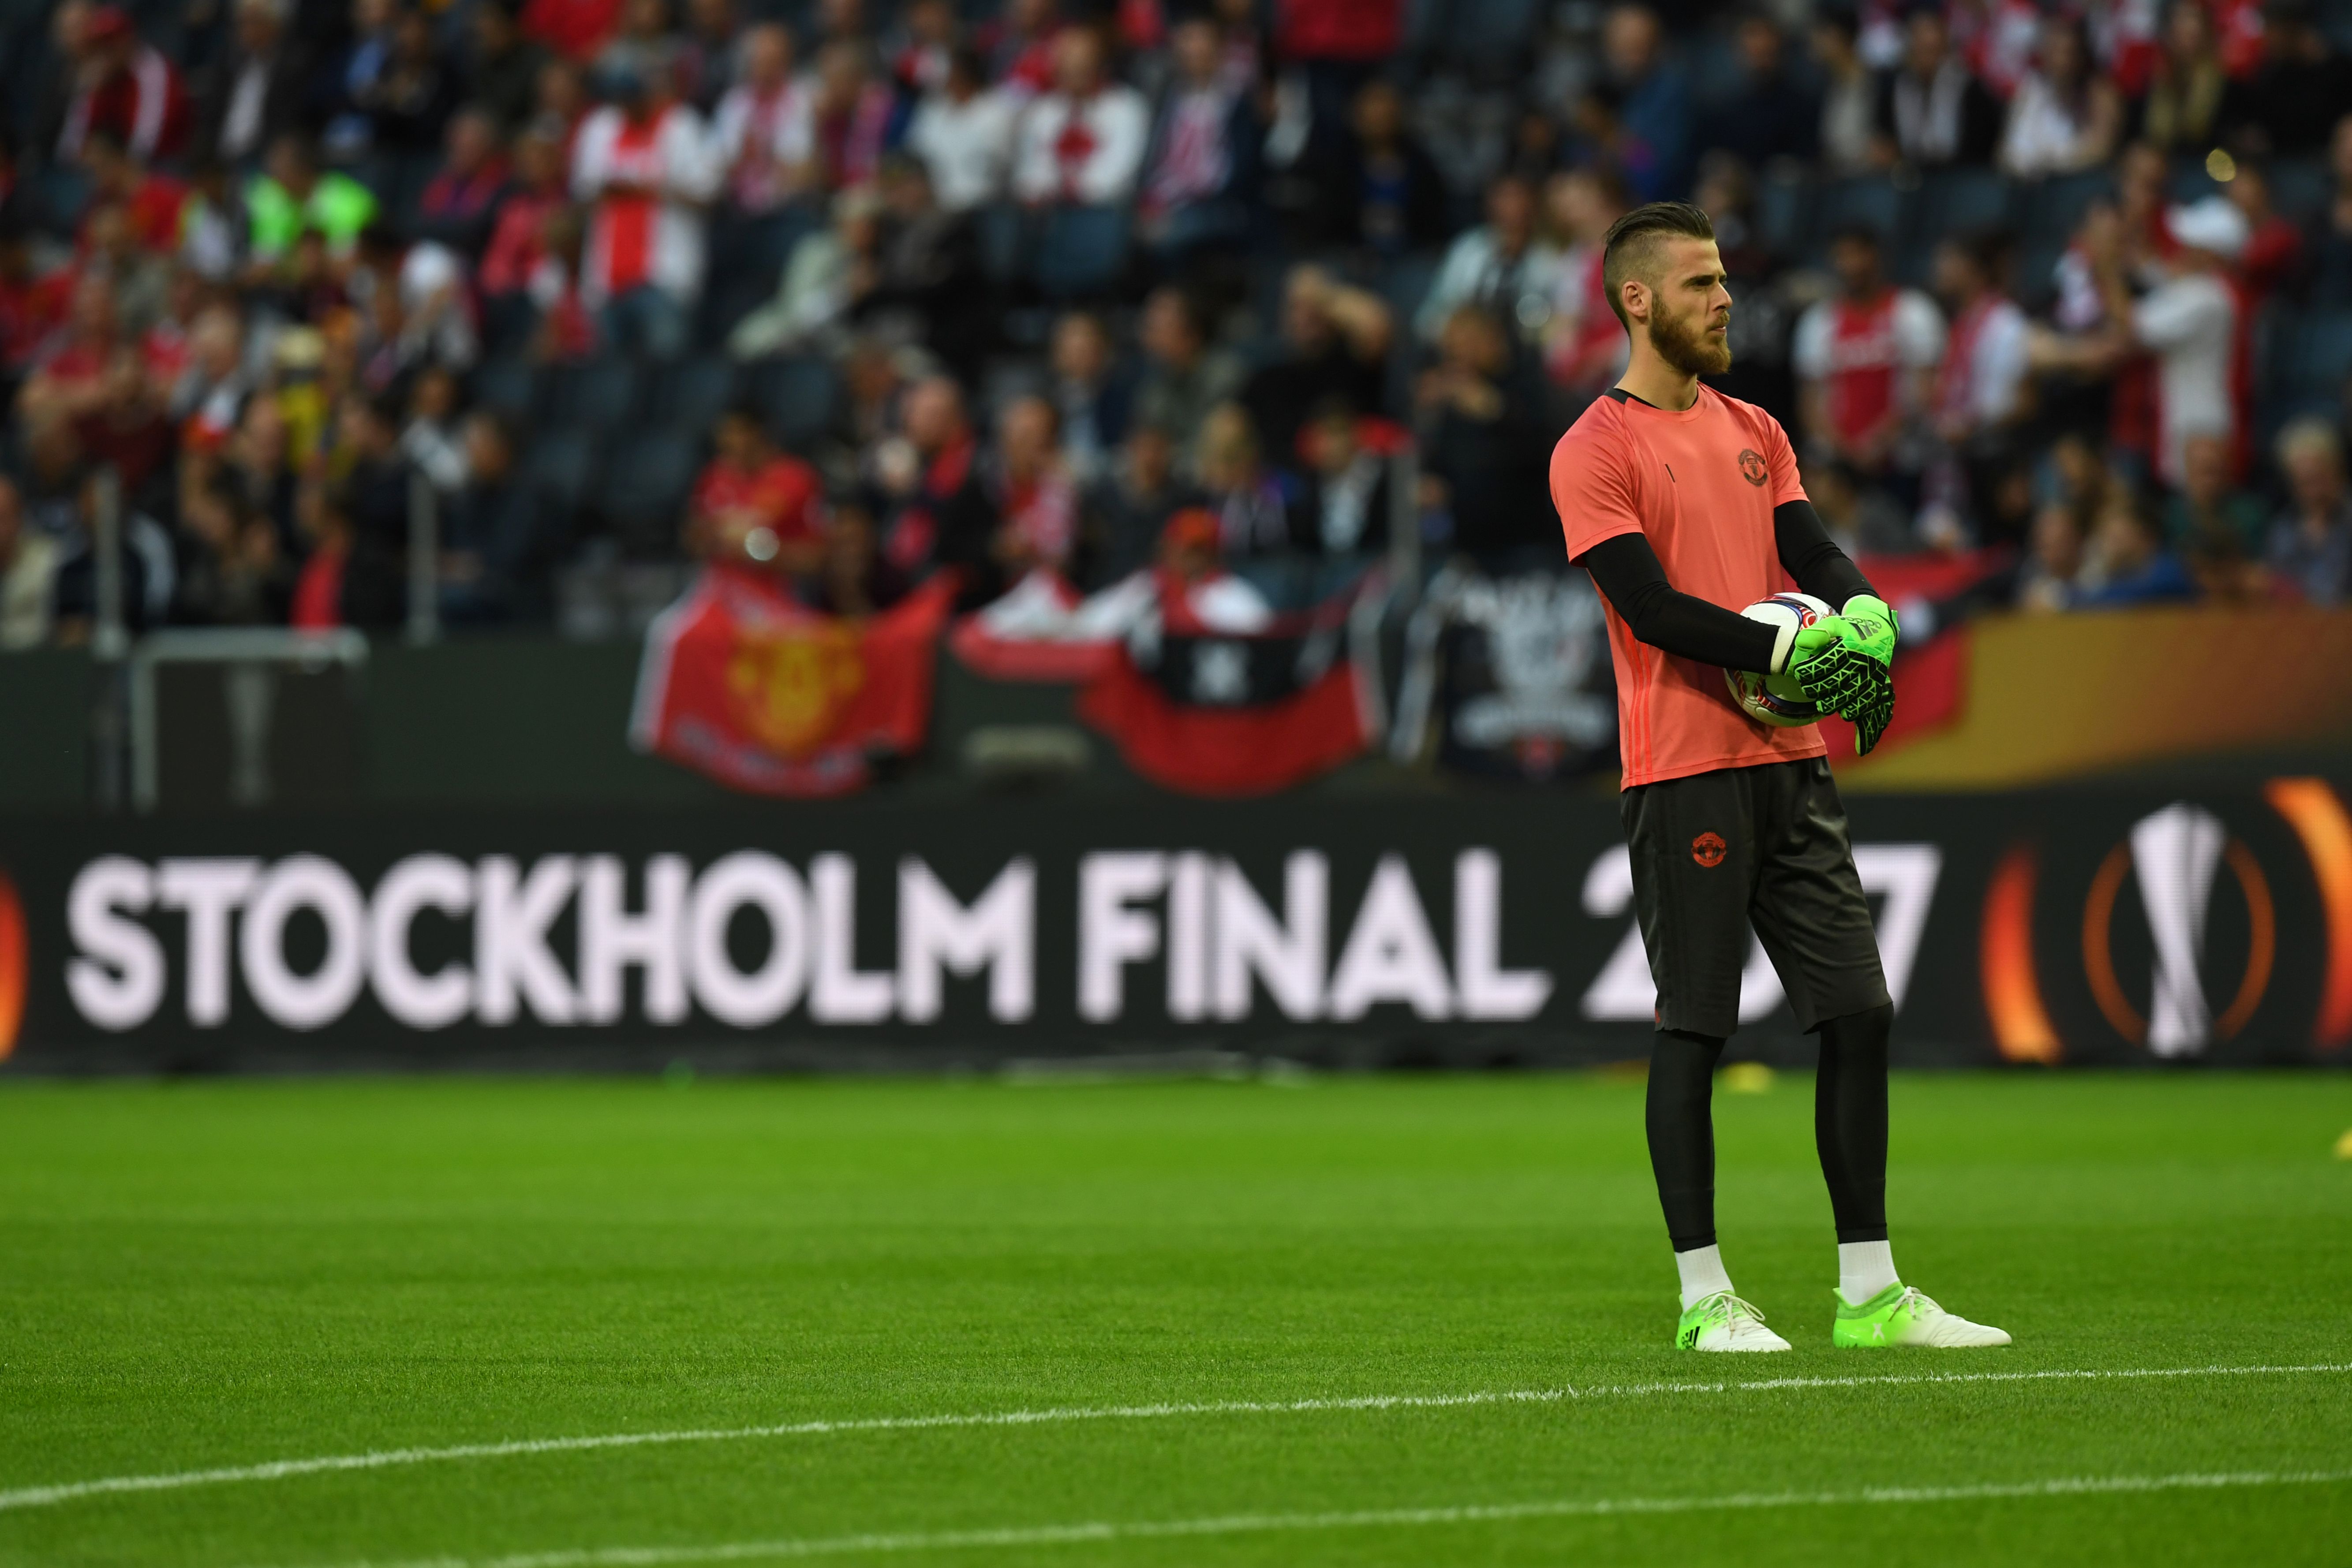 Manchester United's Spanish goalkeeper David de Gea Holds the ball during warm up prior to the UEFA Europa League final football match Ajax Amsterdam v Manchester United on May 24, 2017 at the Friends Arena in Solna outside Stockholm. / AFP PHOTO / Paul ELLIS        (Photo credit should read PAUL ELLIS/AFP/Getty Images)